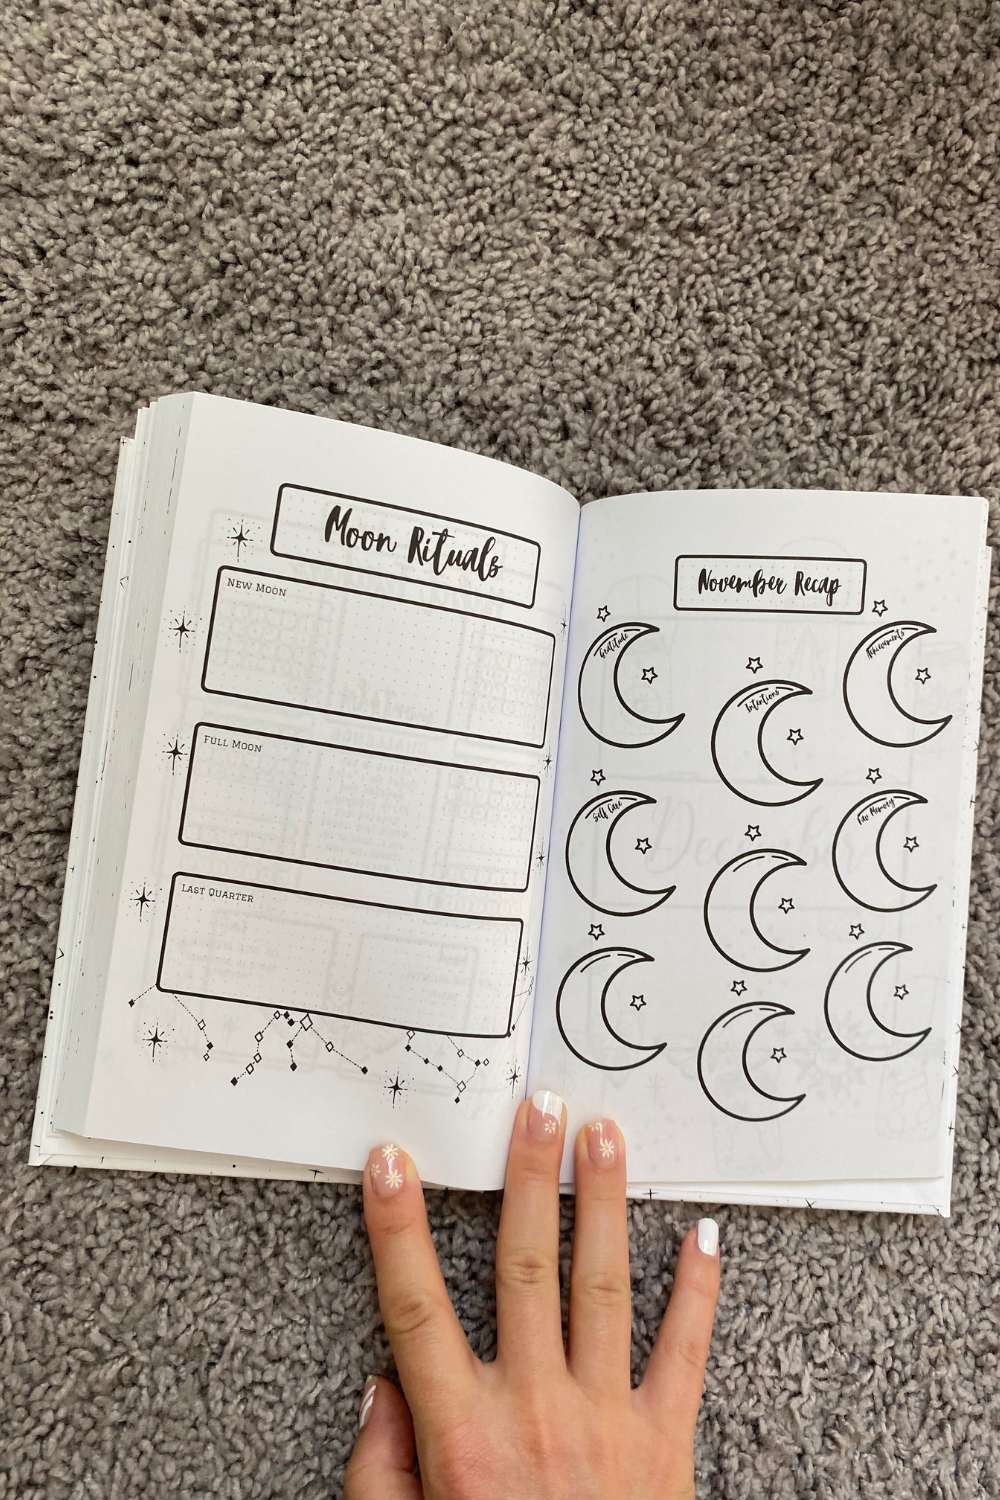 "Dive into our Self-Care Witchy Bullet Journal with monthly moon rituals! Designed for those who crave a ready-to-use bullet journal infused with magic. Start your mystical self-care journey today!"